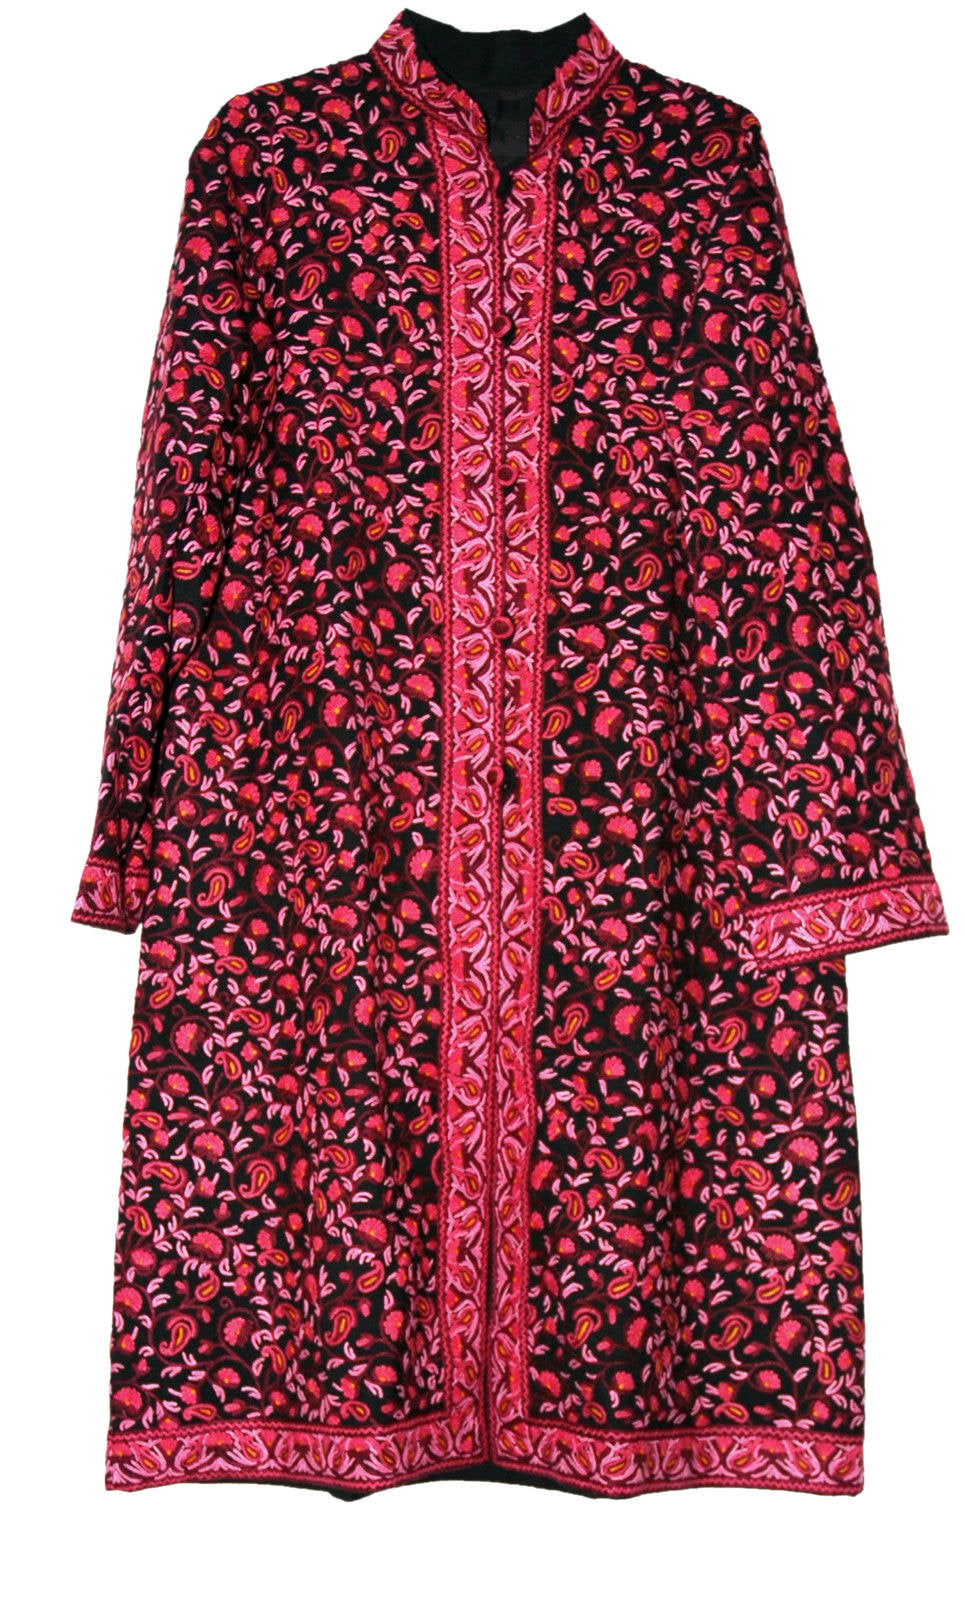 Woolen Coat Long Jacket Black, Pink and Magenta Embroidery #AO-1606